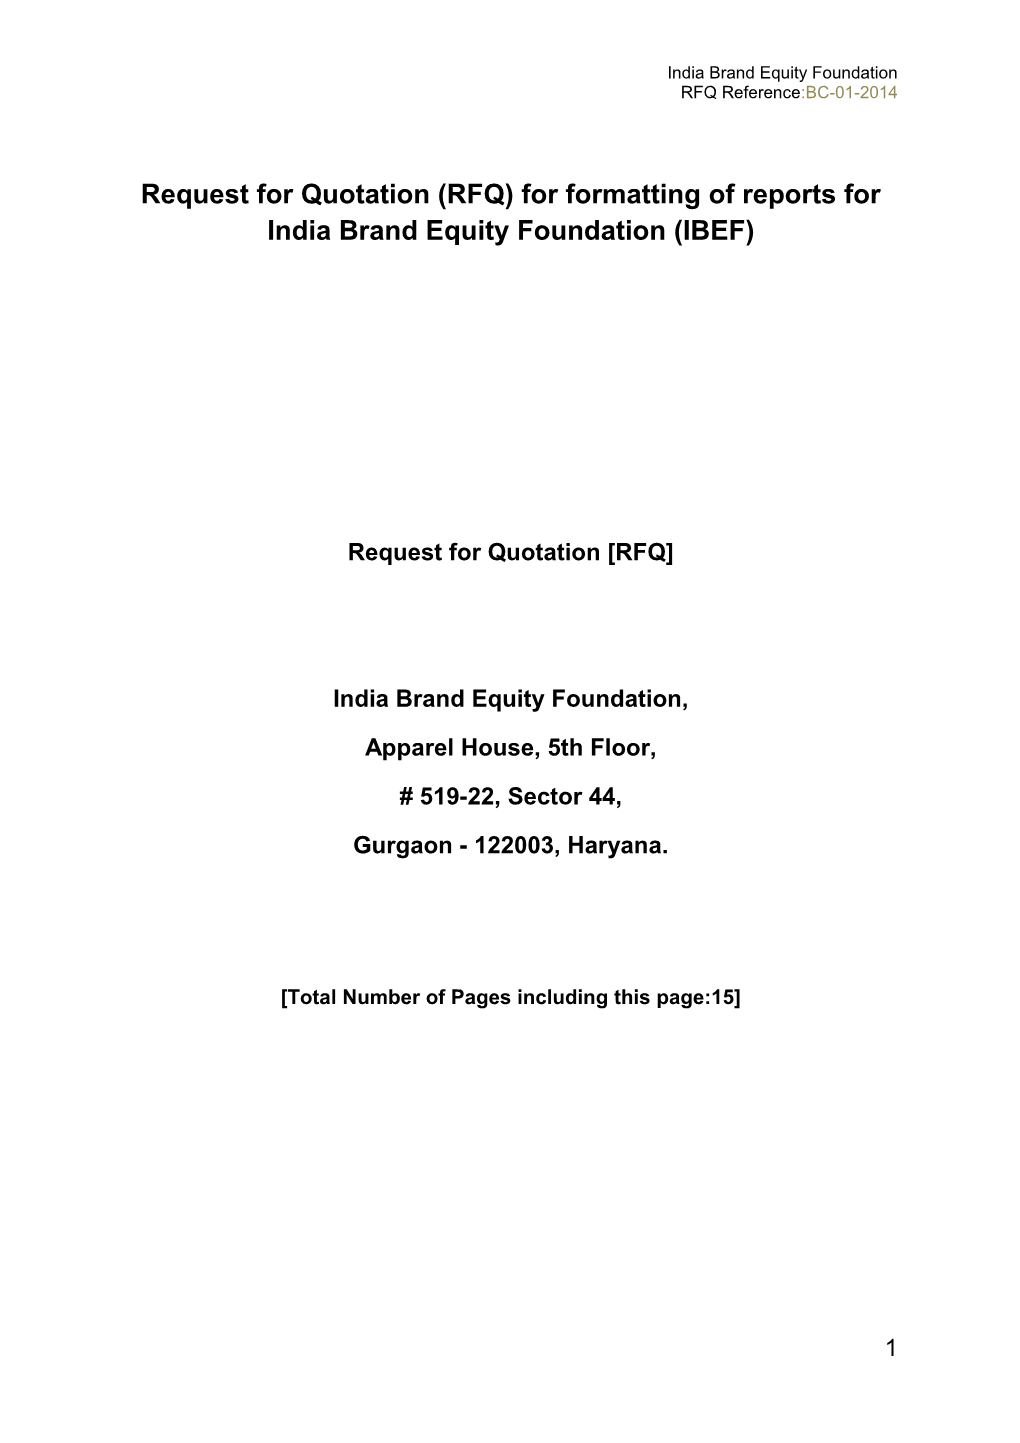 Request for Quotation (RFQ) for Formatting of Reportsforindia Brand Equity Foundation (IBEF)